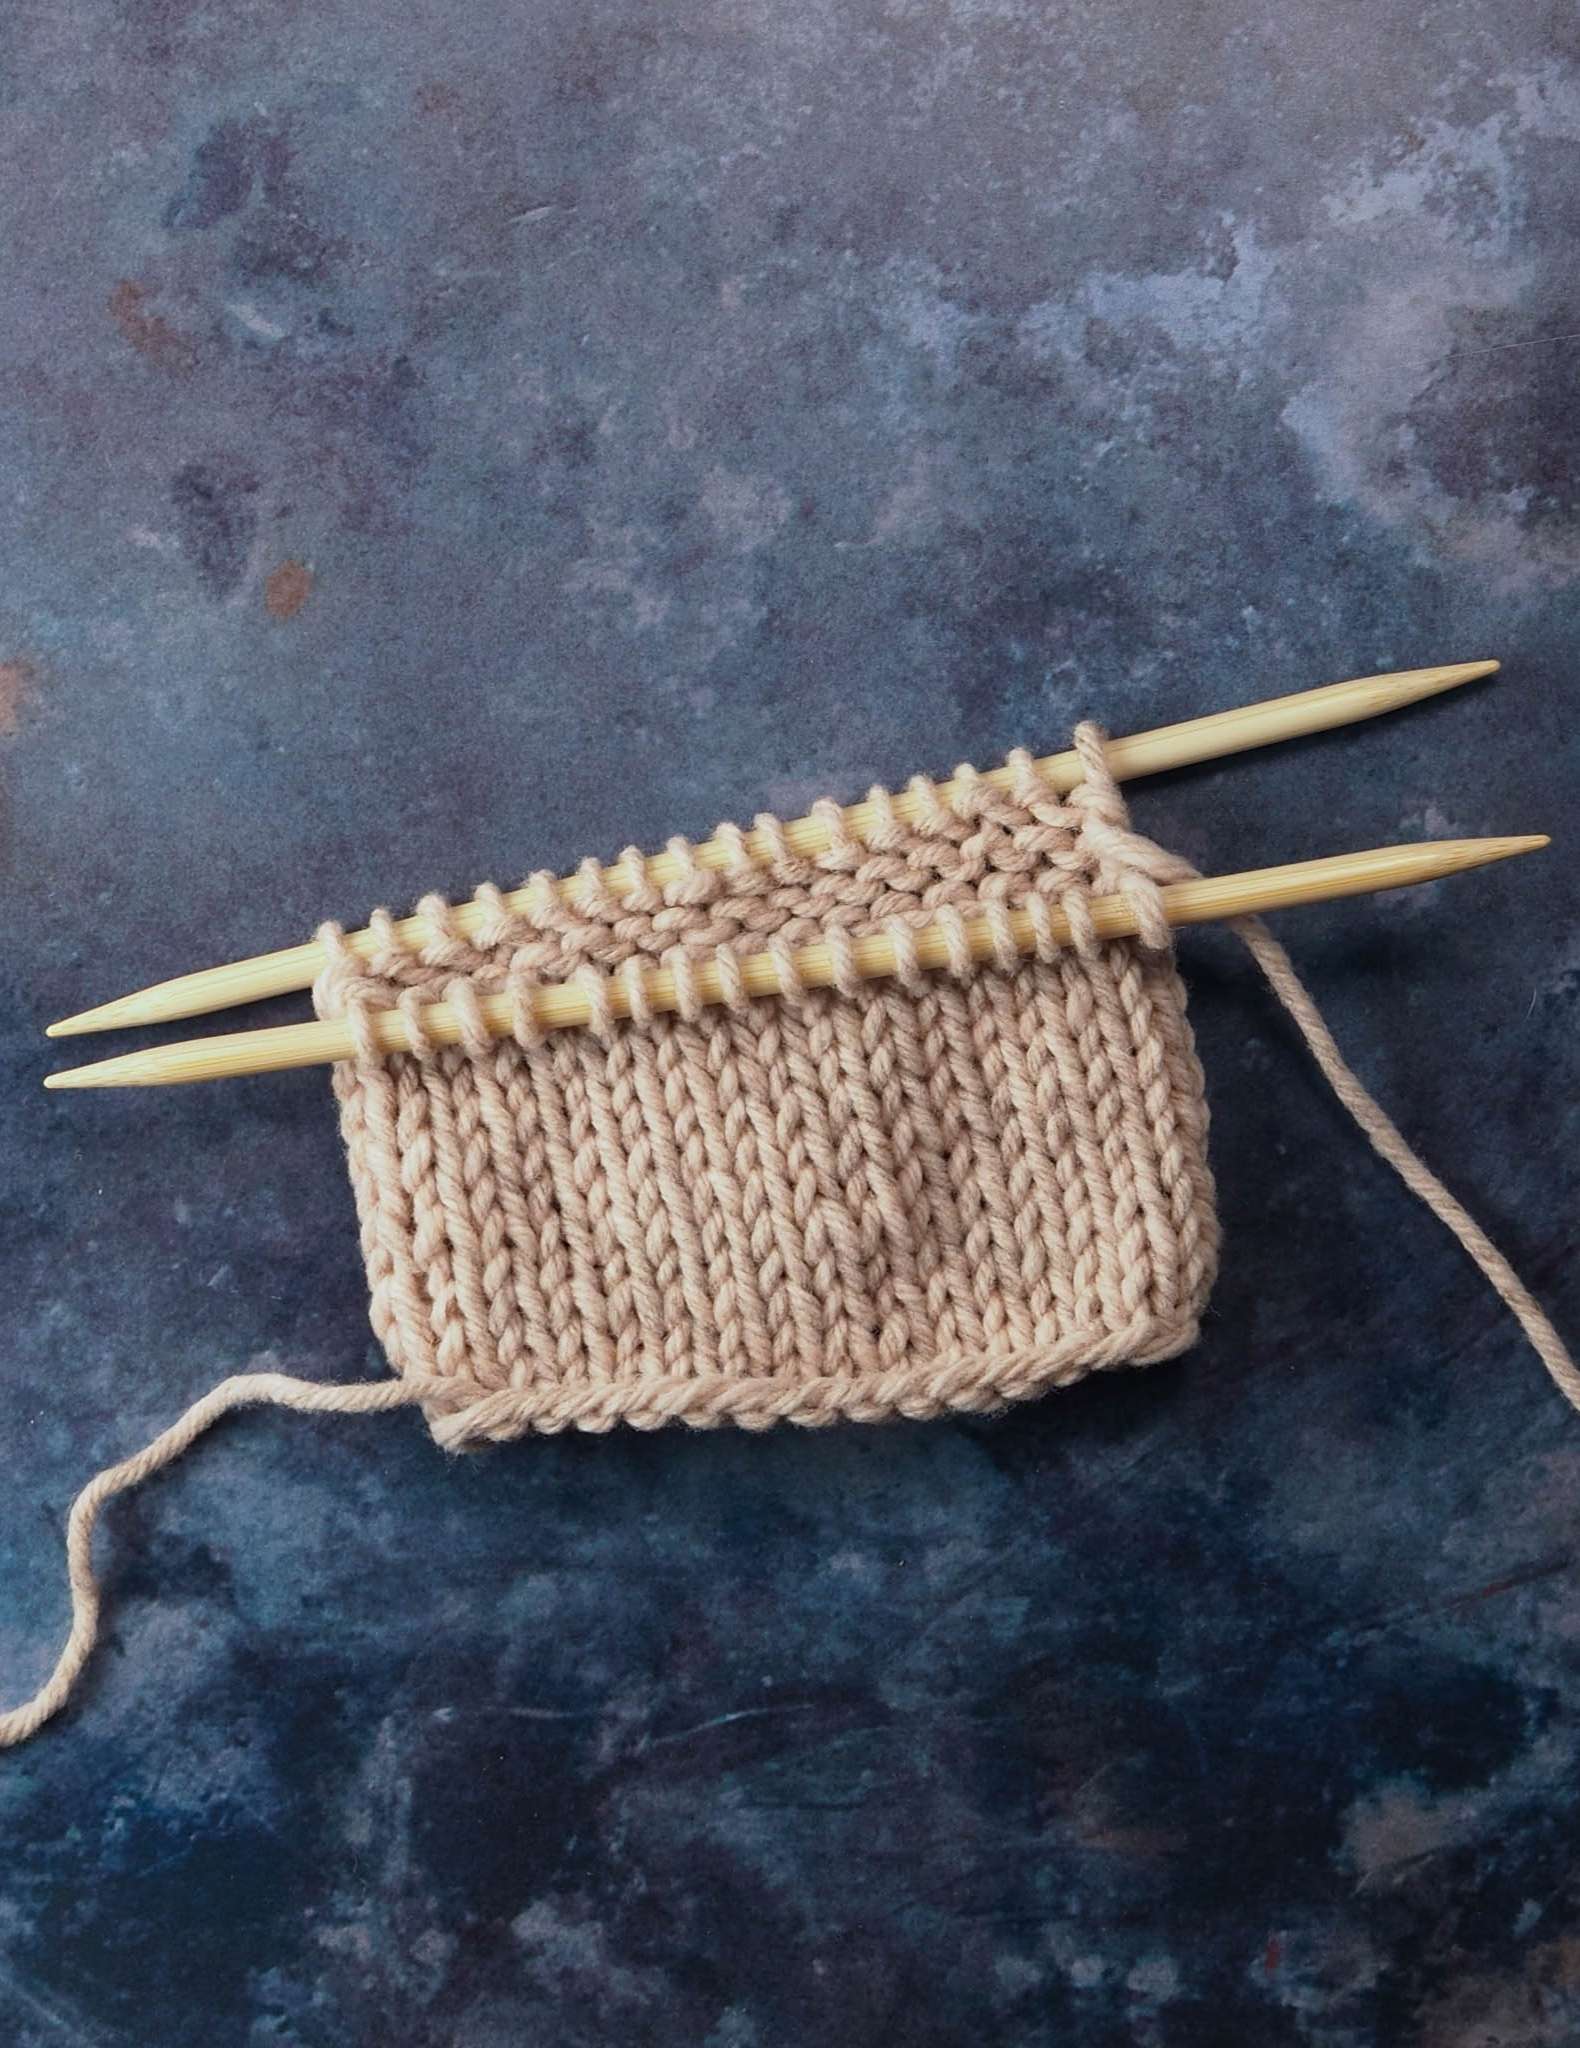 Best double pointed needles for knitting socks - LAURA TEAGUE